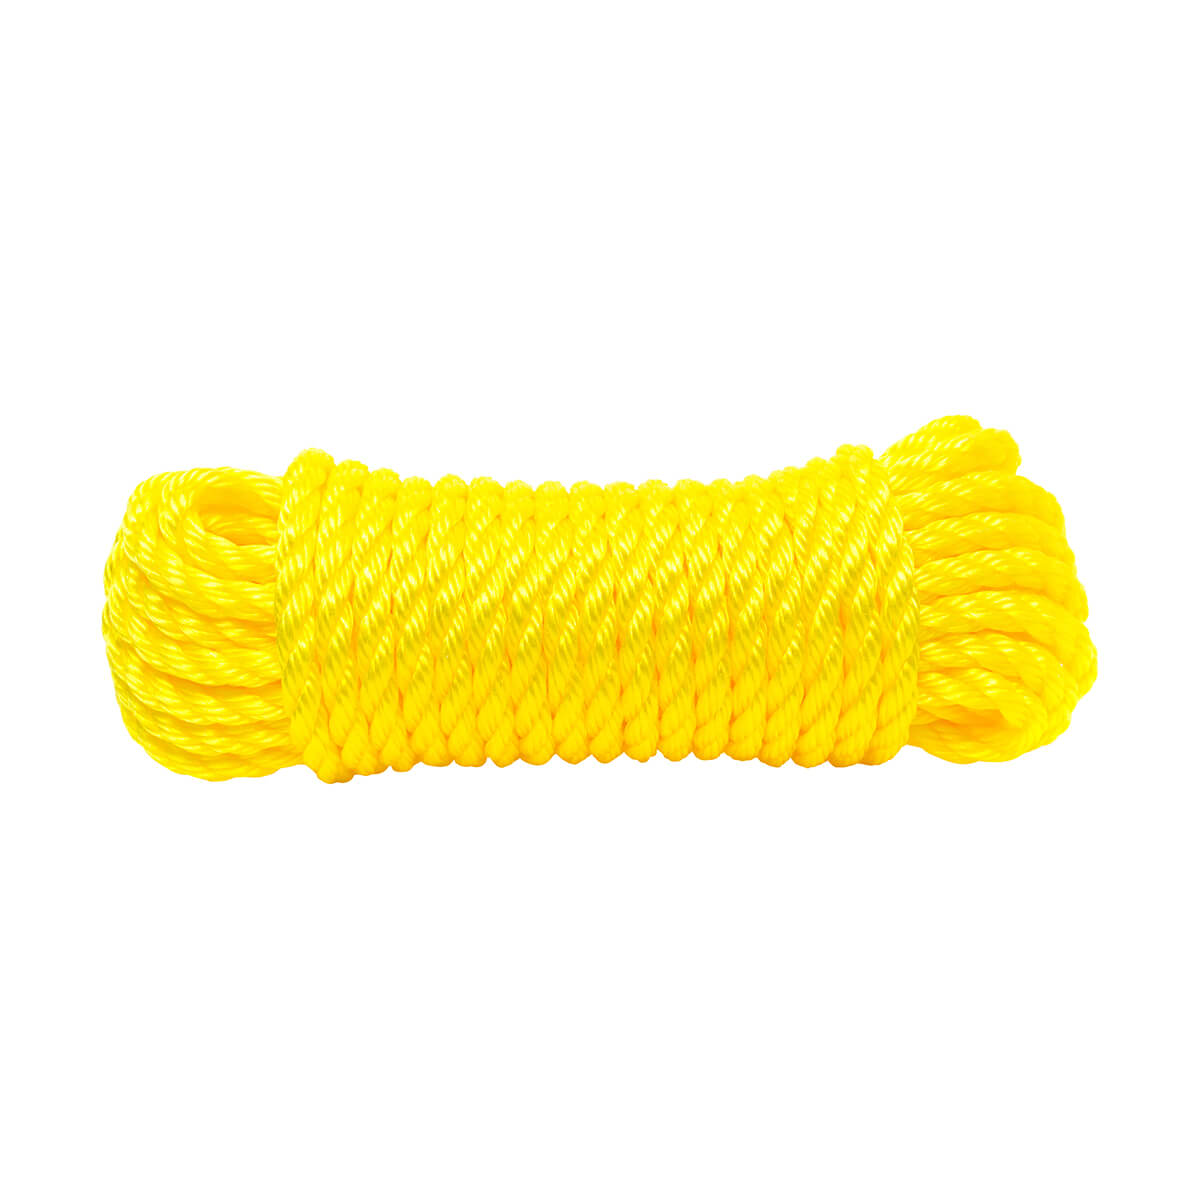 Twisted Polypropylene Rope Hank - Yellow - 1/2-in x 50-ft